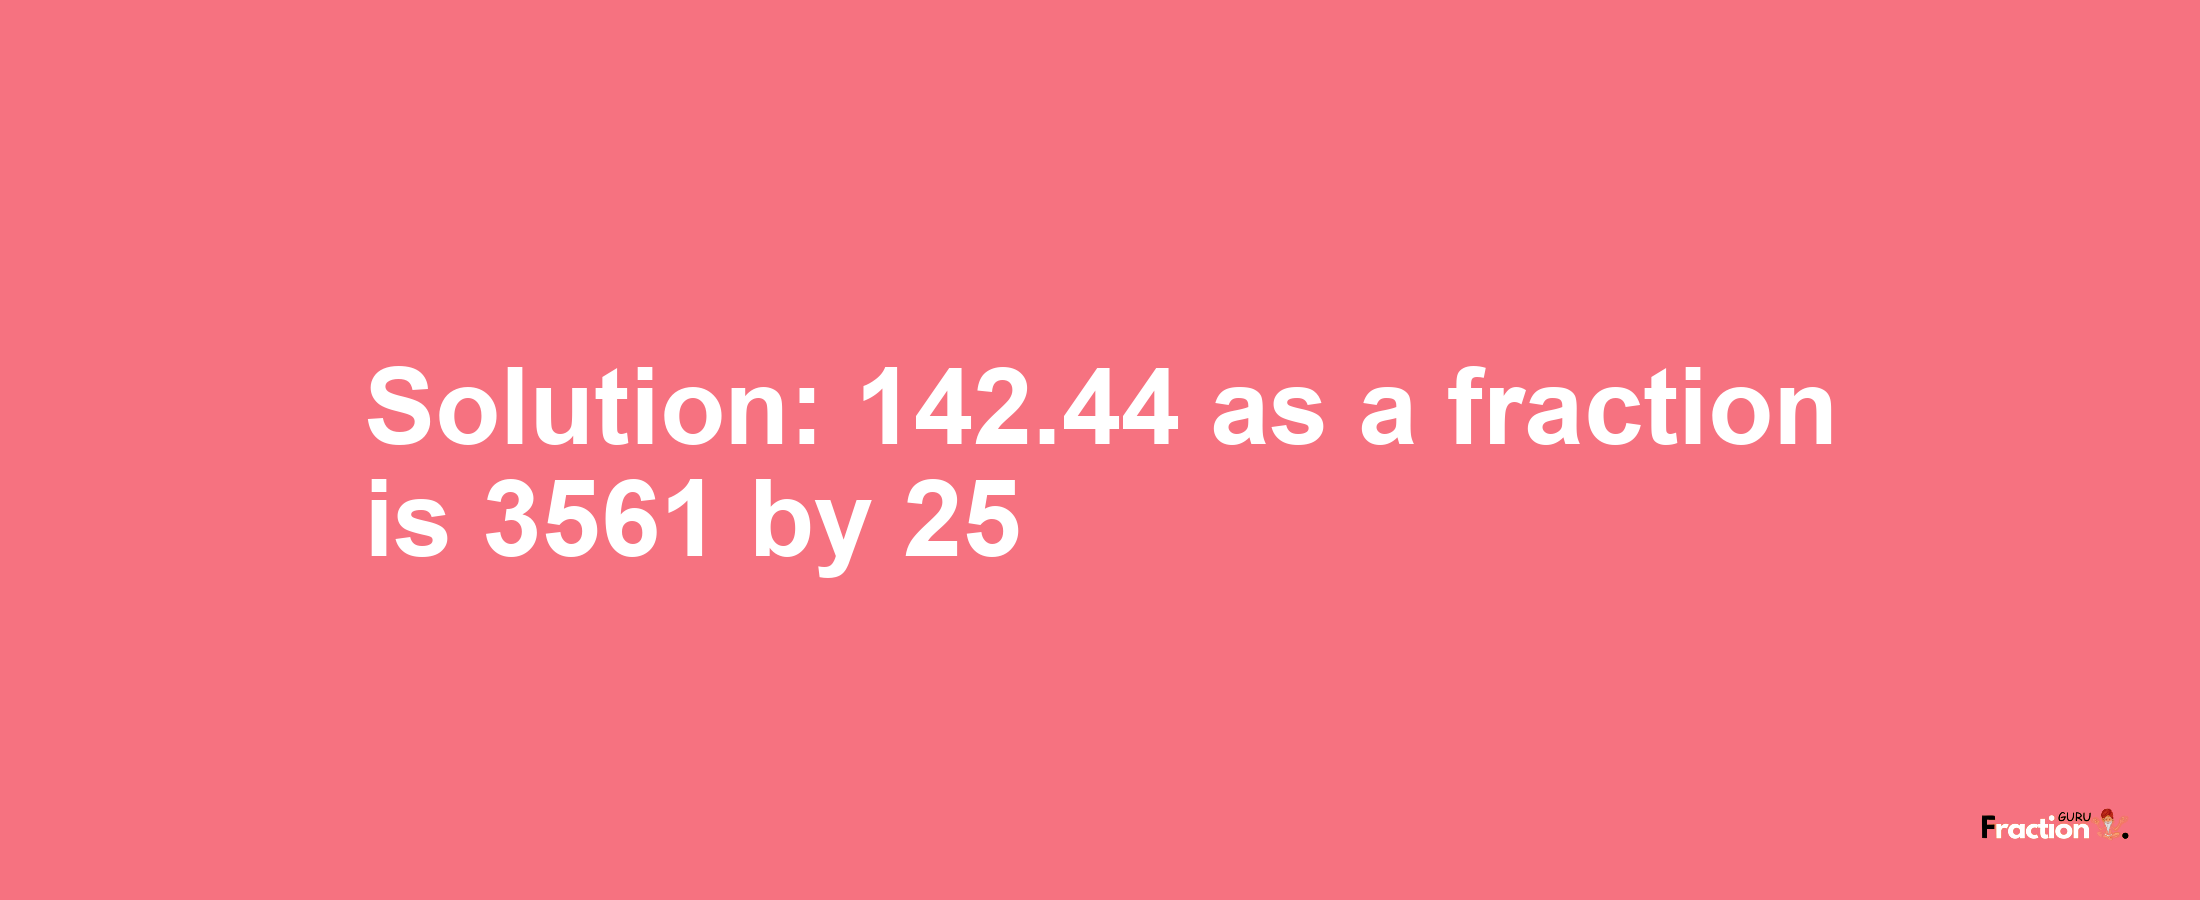 Solution:142.44 as a fraction is 3561/25